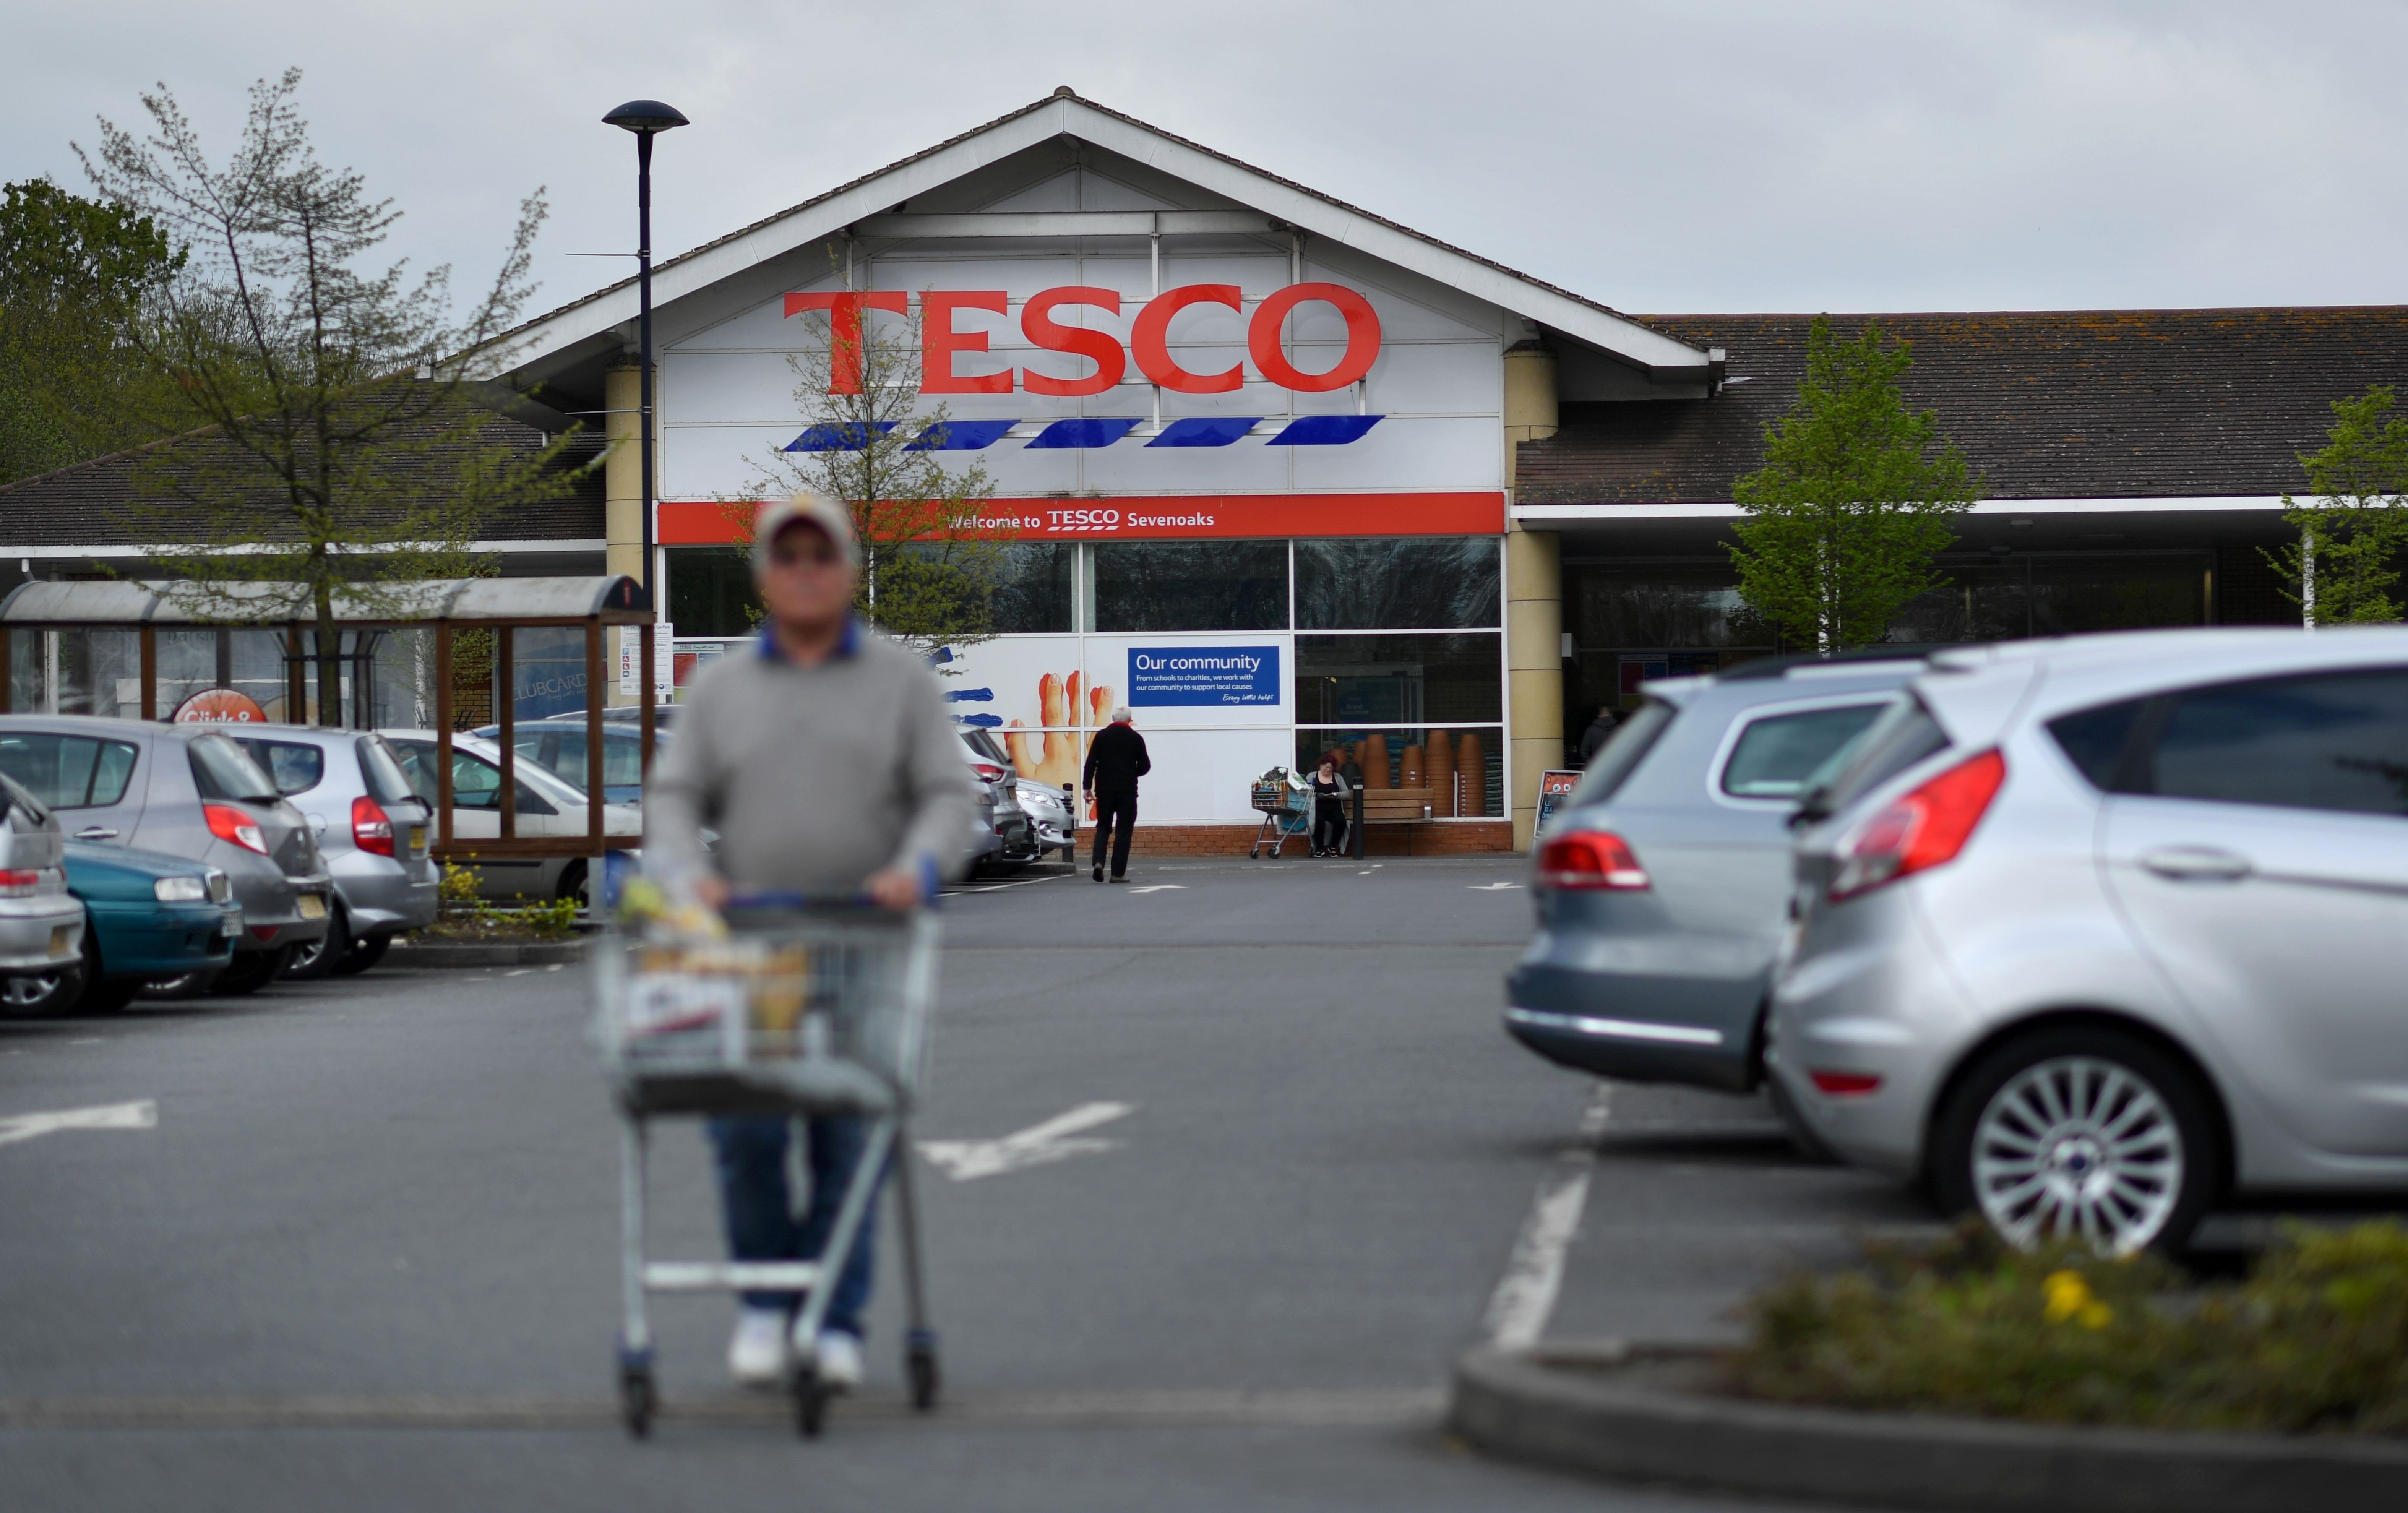 Britain’s biggest retailer Tesco said it was “shocked by these allegations”. Photo: AFP